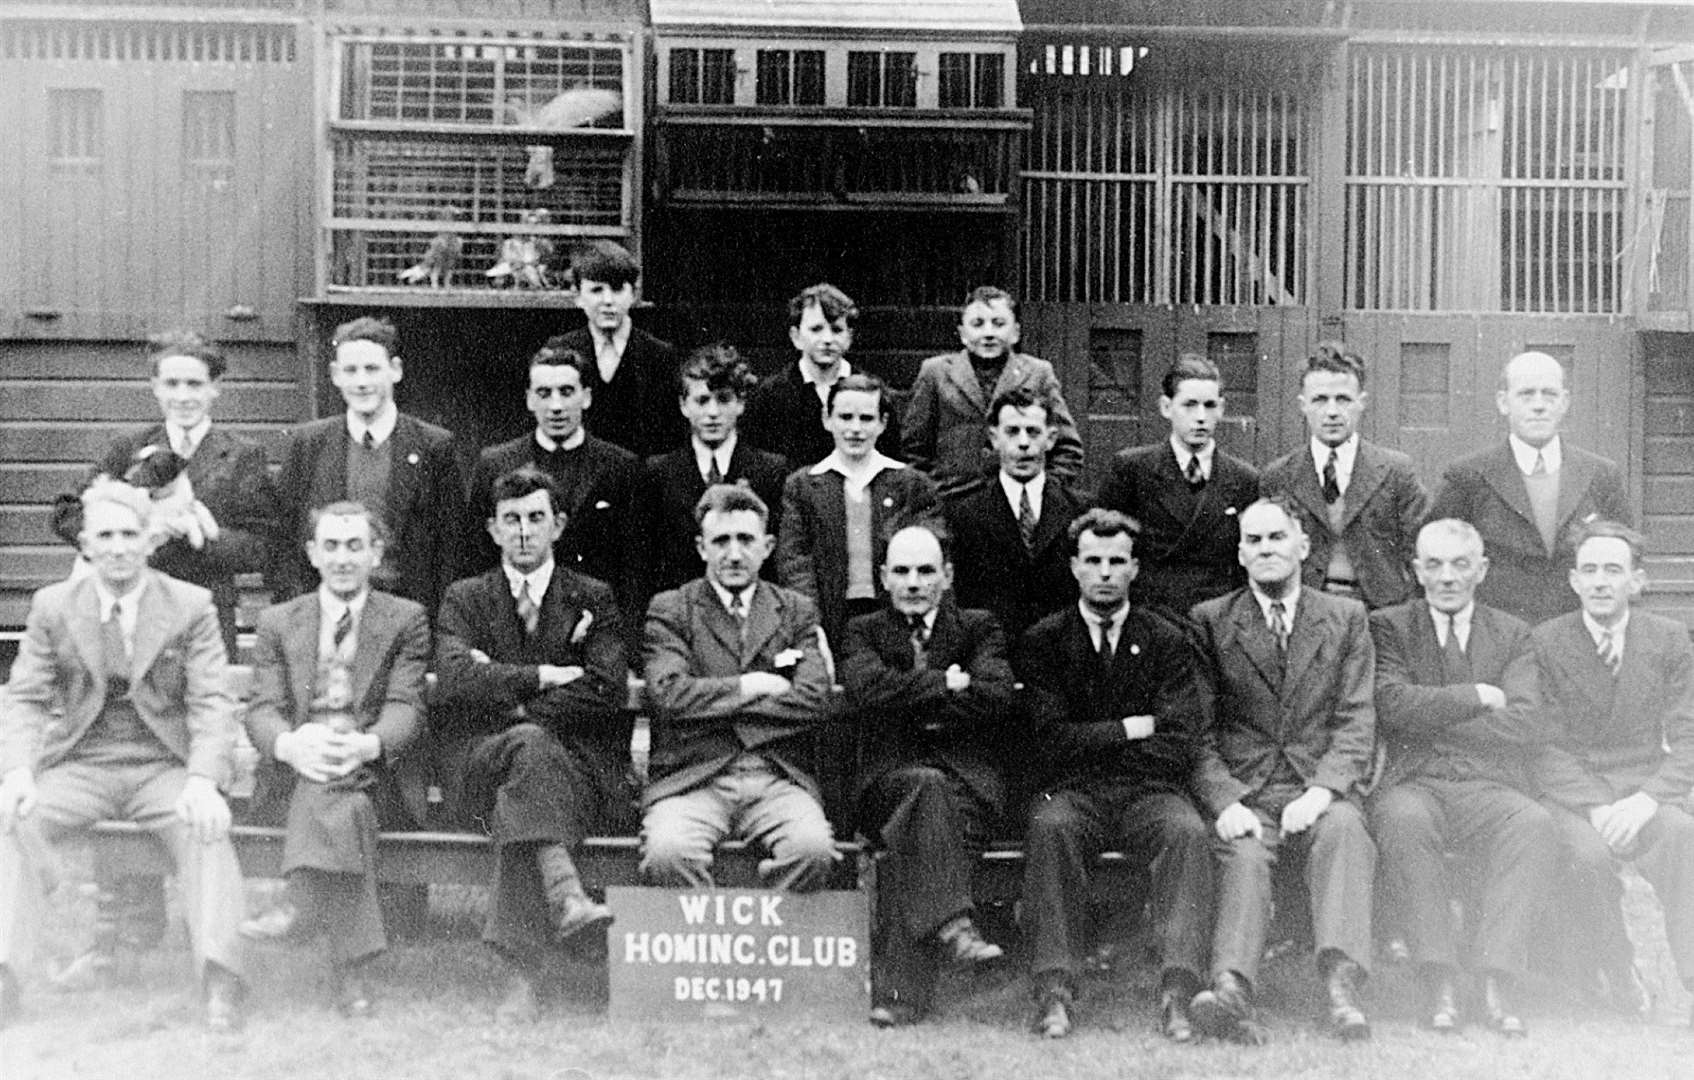 Pigeon racing enthusiasts from Wick Homing Club pictured in front of Wulldag Miller’s loft in 1947.